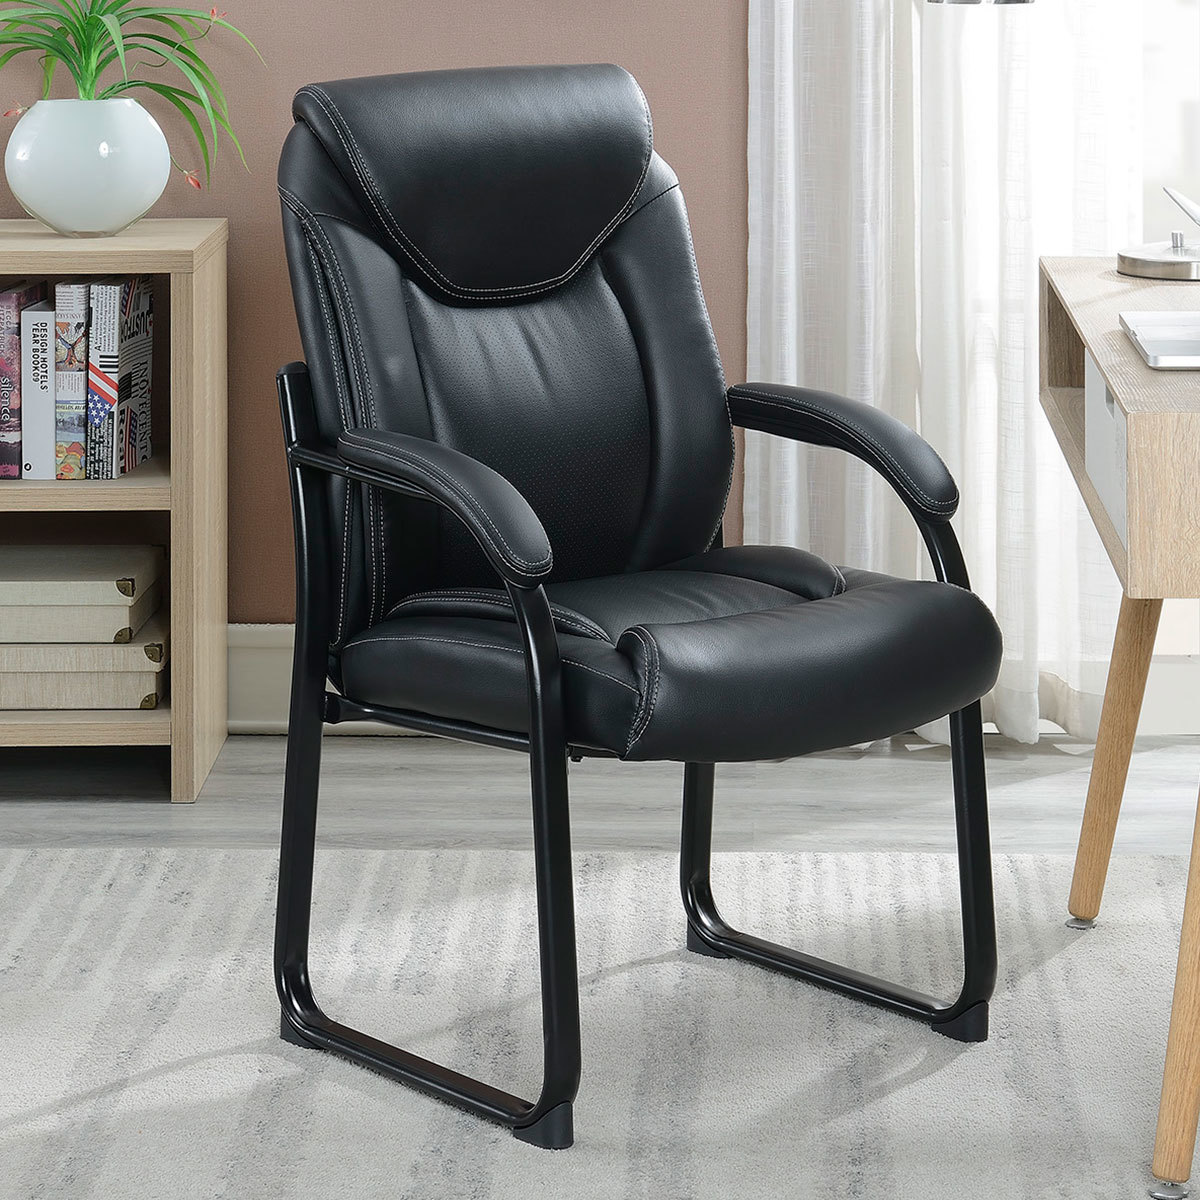 Executive Leather Office Chair Costco : Office Chairs Costco : These chairs made my recommended